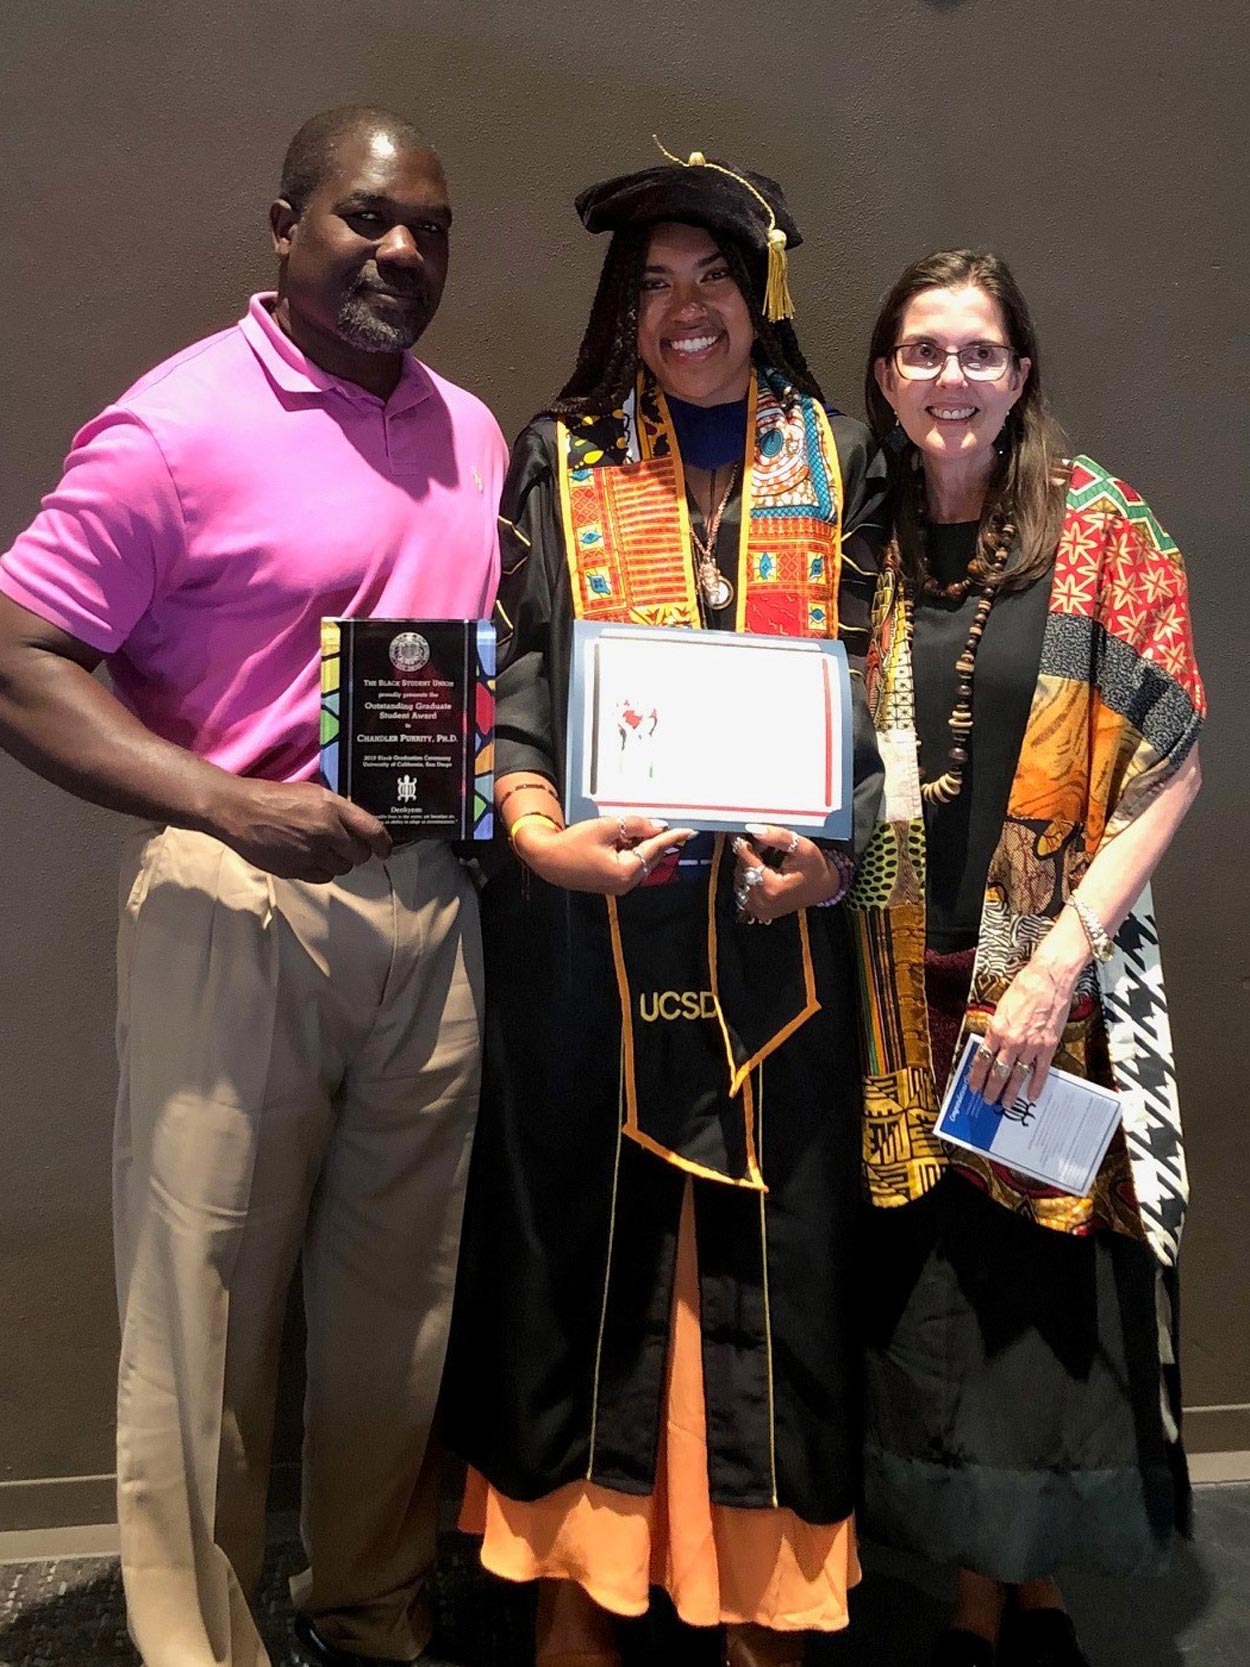 Chandler Puritty standing with her parents after receiving the 2019 Black Student Union’s Outstanding Graduate Student Award.